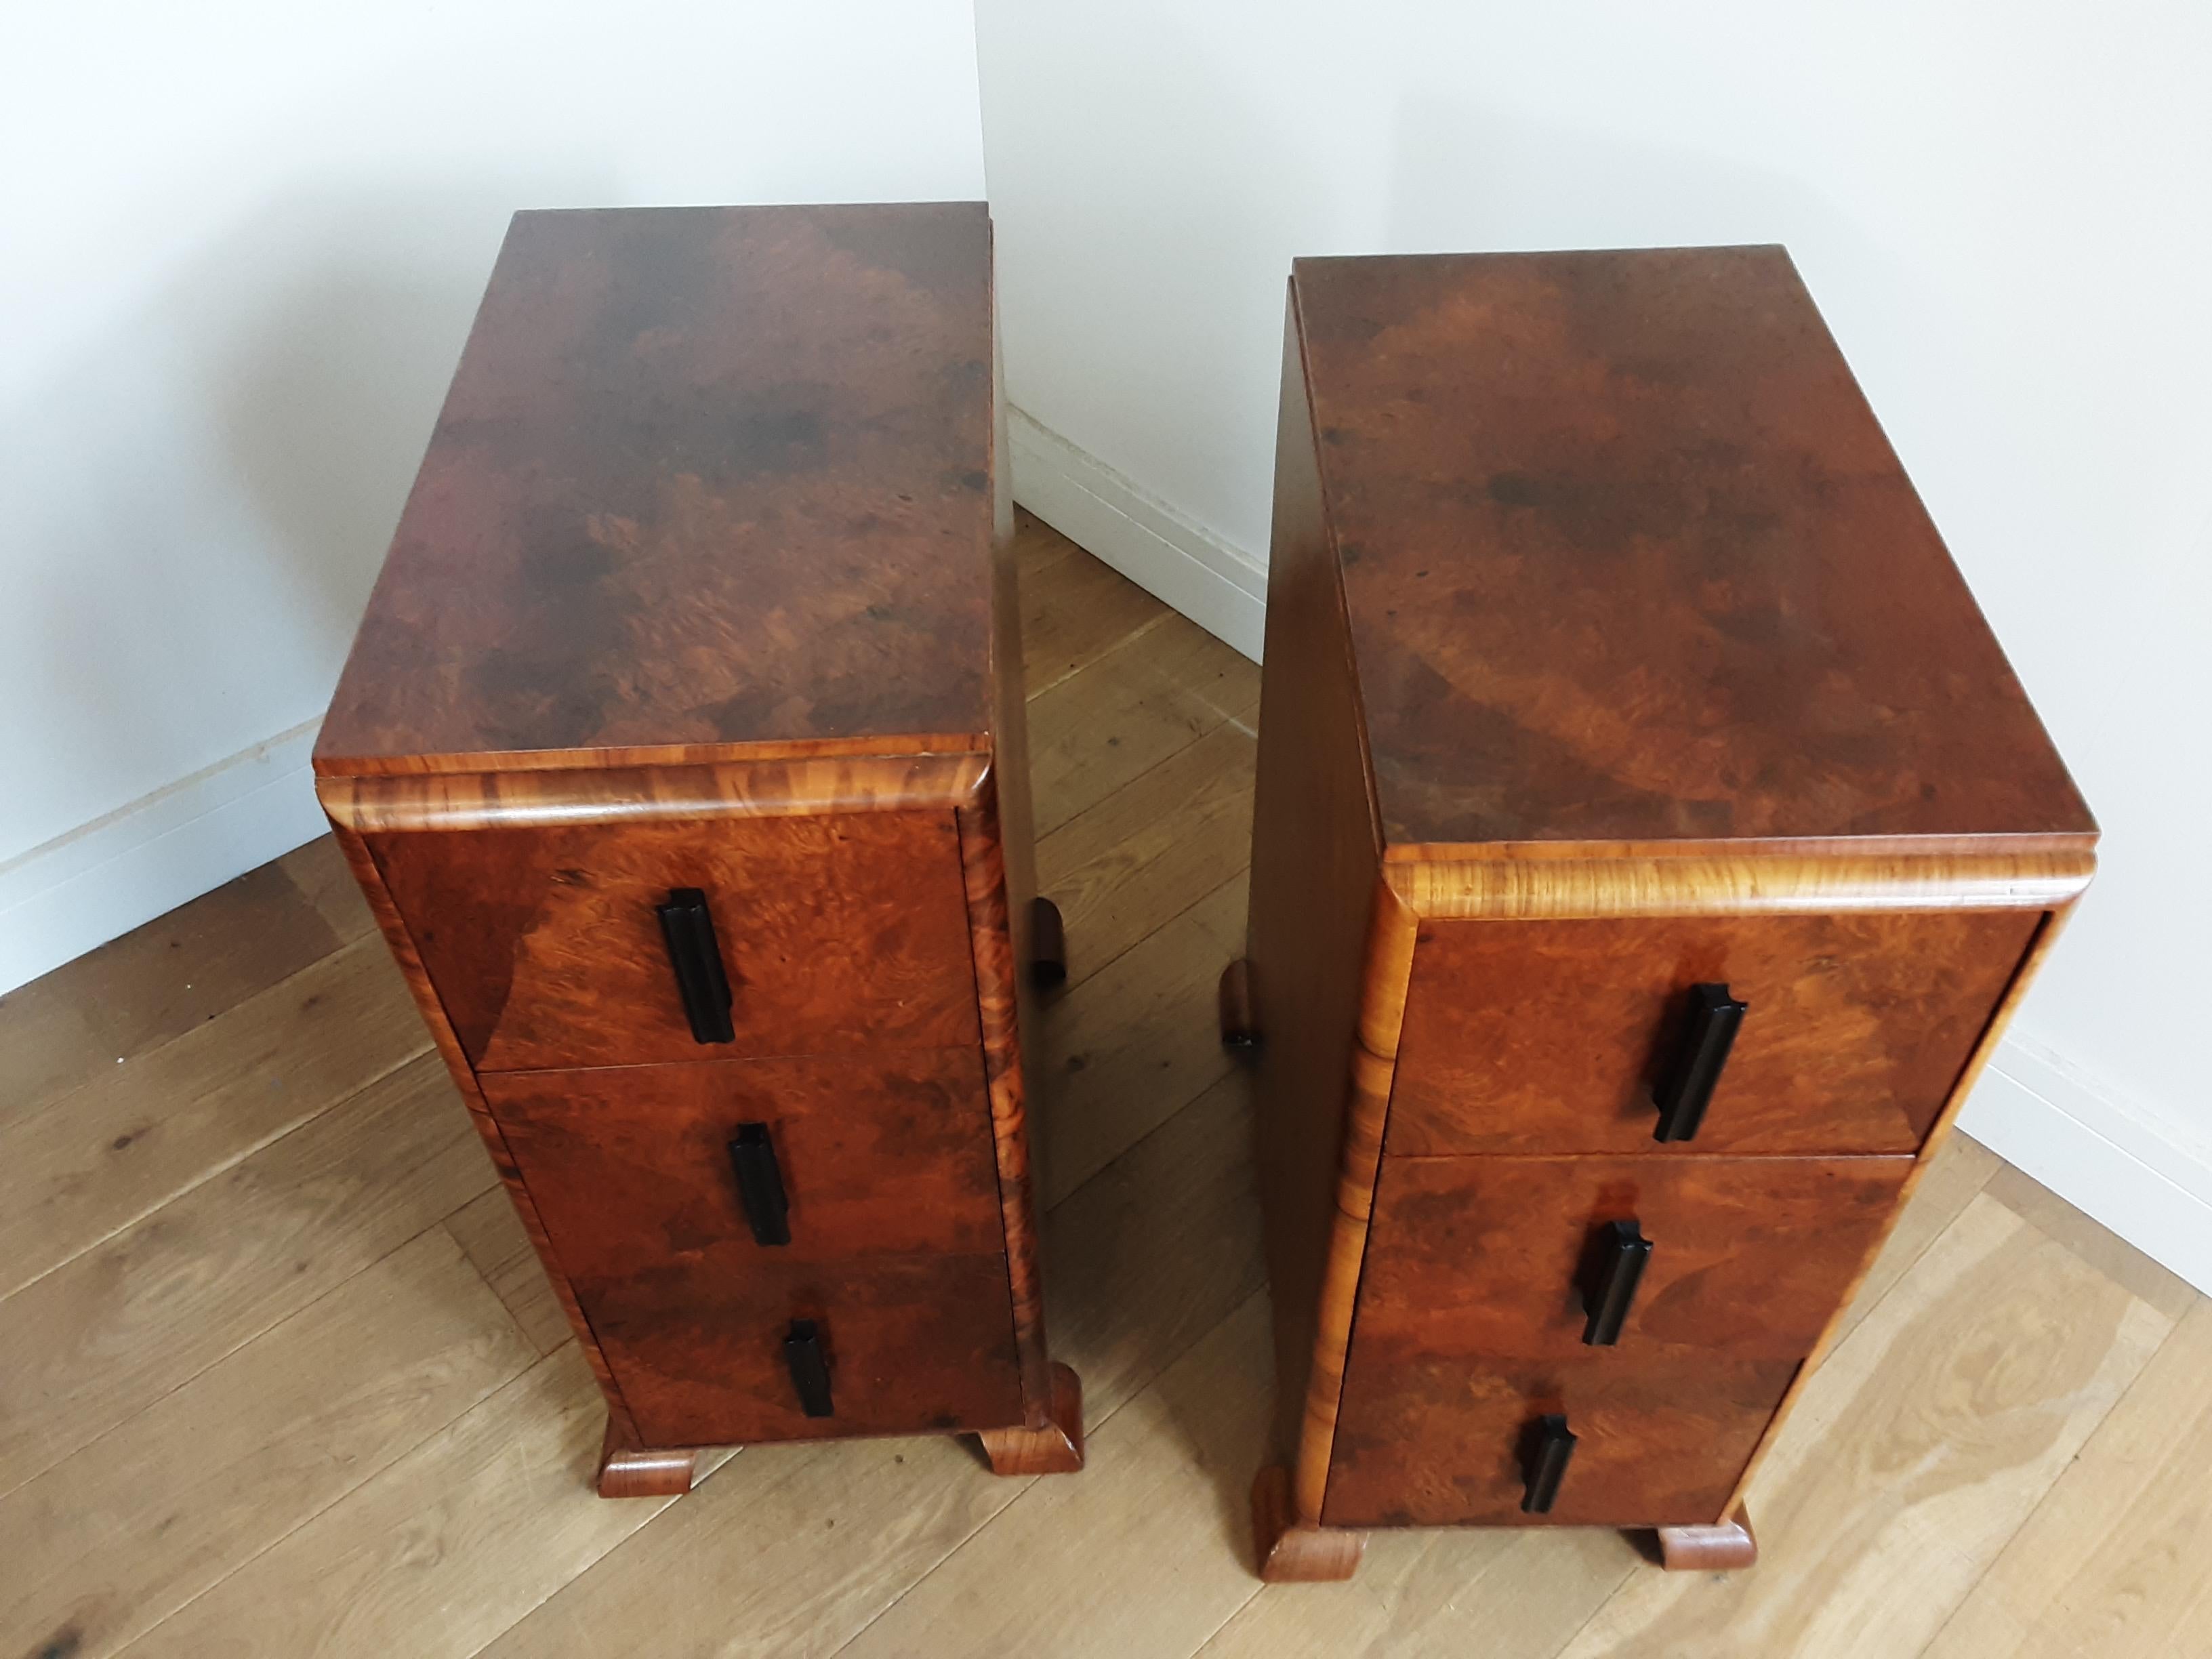 A pair of three-drawer art deco bedside cabinets.
Beautiful figured walnut with nice curved edges and ebonized handles, circa 1930.
Measures: 72 cm H, 30 cm, W 54 cm, D with handles 35 cm W at feet,
British.